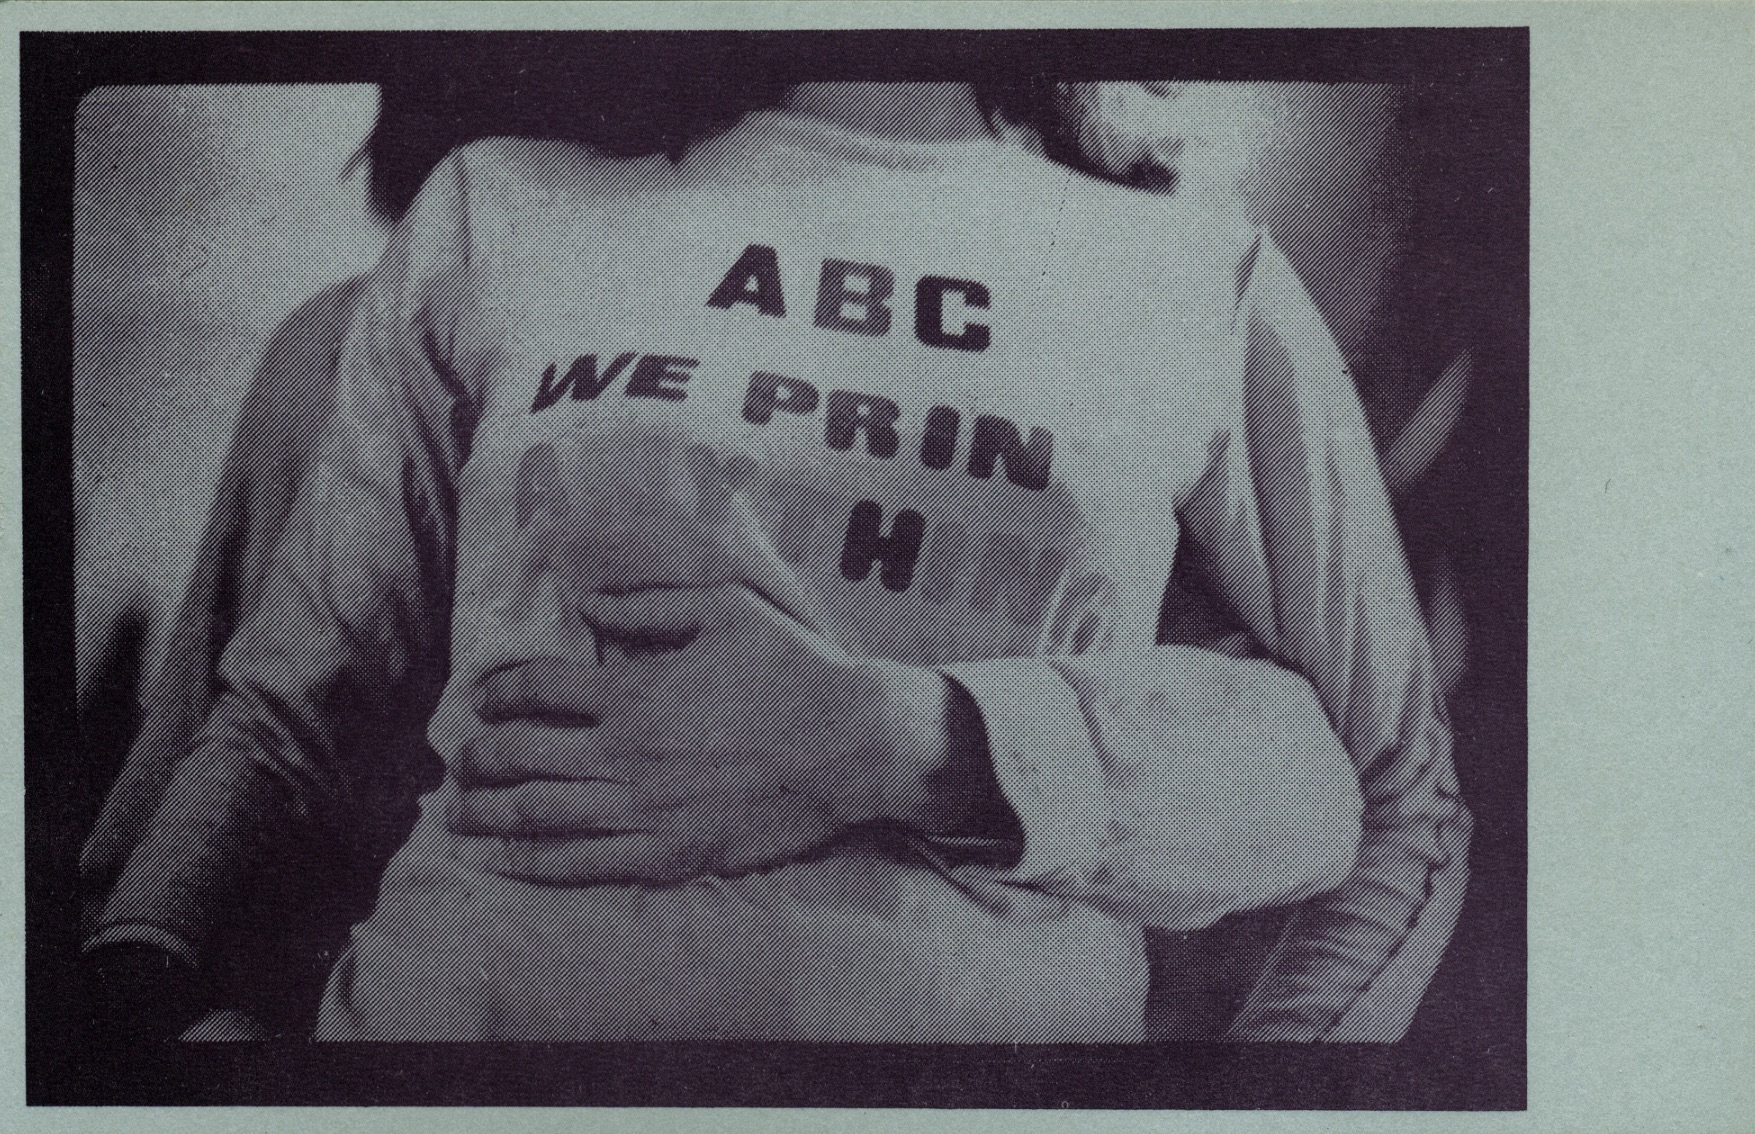 black and white image zoomed in on someone's shirt which says "ABC We Print Anything;" Another person's arm is wrapped around them